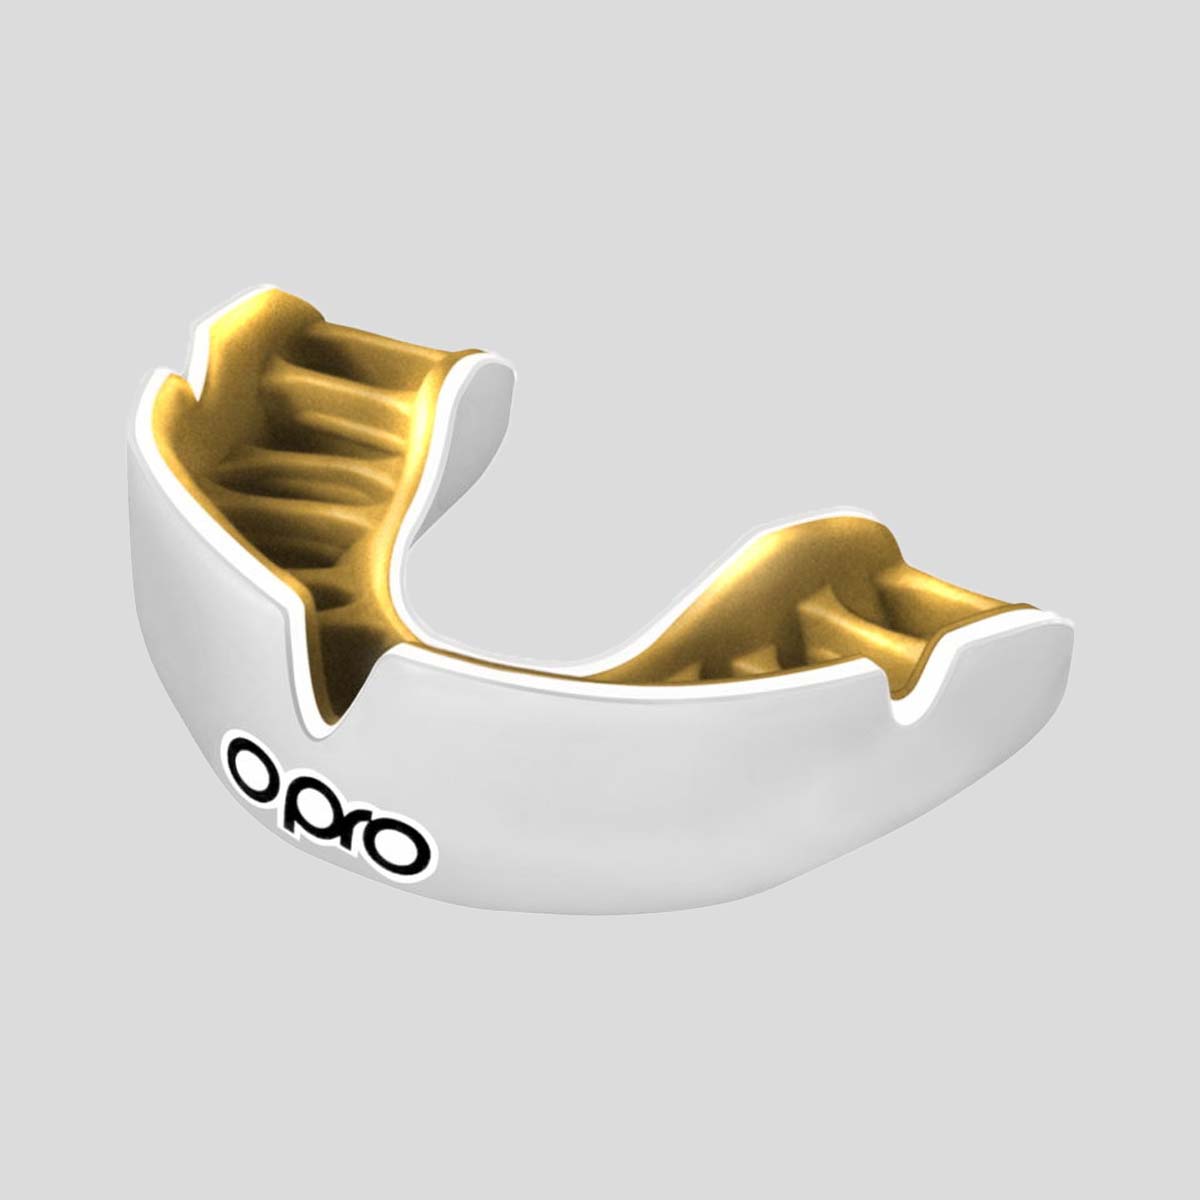 Taekwondo Mouthguards - OPRO's Superior Protection for Your Teeth